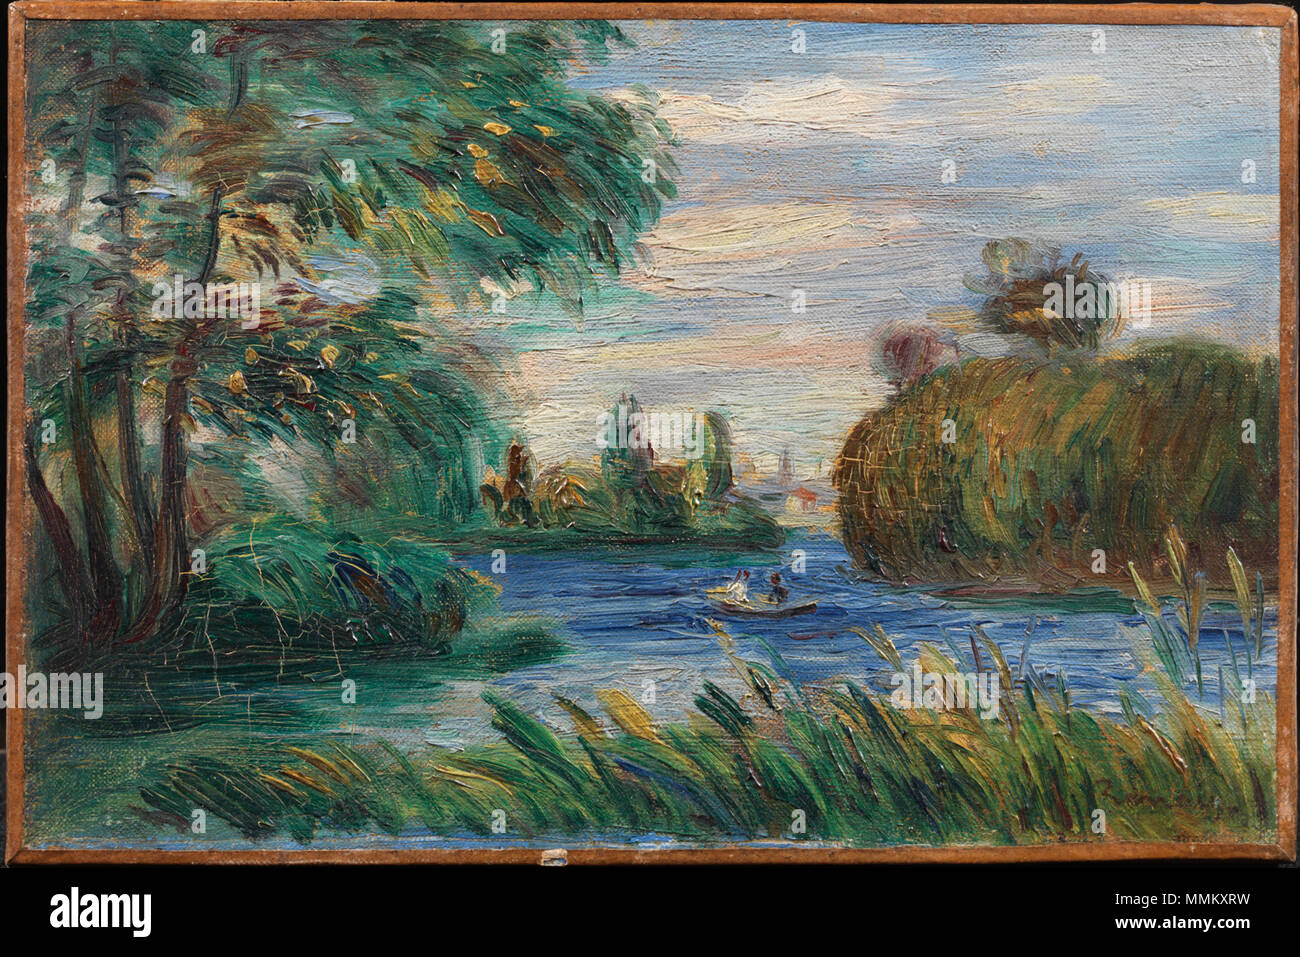 .  English: Pierre Auguste Renoir, French, 1841–1919 River Landscape Oil on canvas 16 x 24.2 cm. (6 5/16 x 9 1/2 in.) frame: 32.5 × 40 × 6.4 cm (12 13/16 × 15 3/4 × 2 1/2 in.) Gift of J. Lionberger Davis, Class of 1900 y1968-1  . before 1919. 11 1887, Renoir, River Landscape Stock Photo